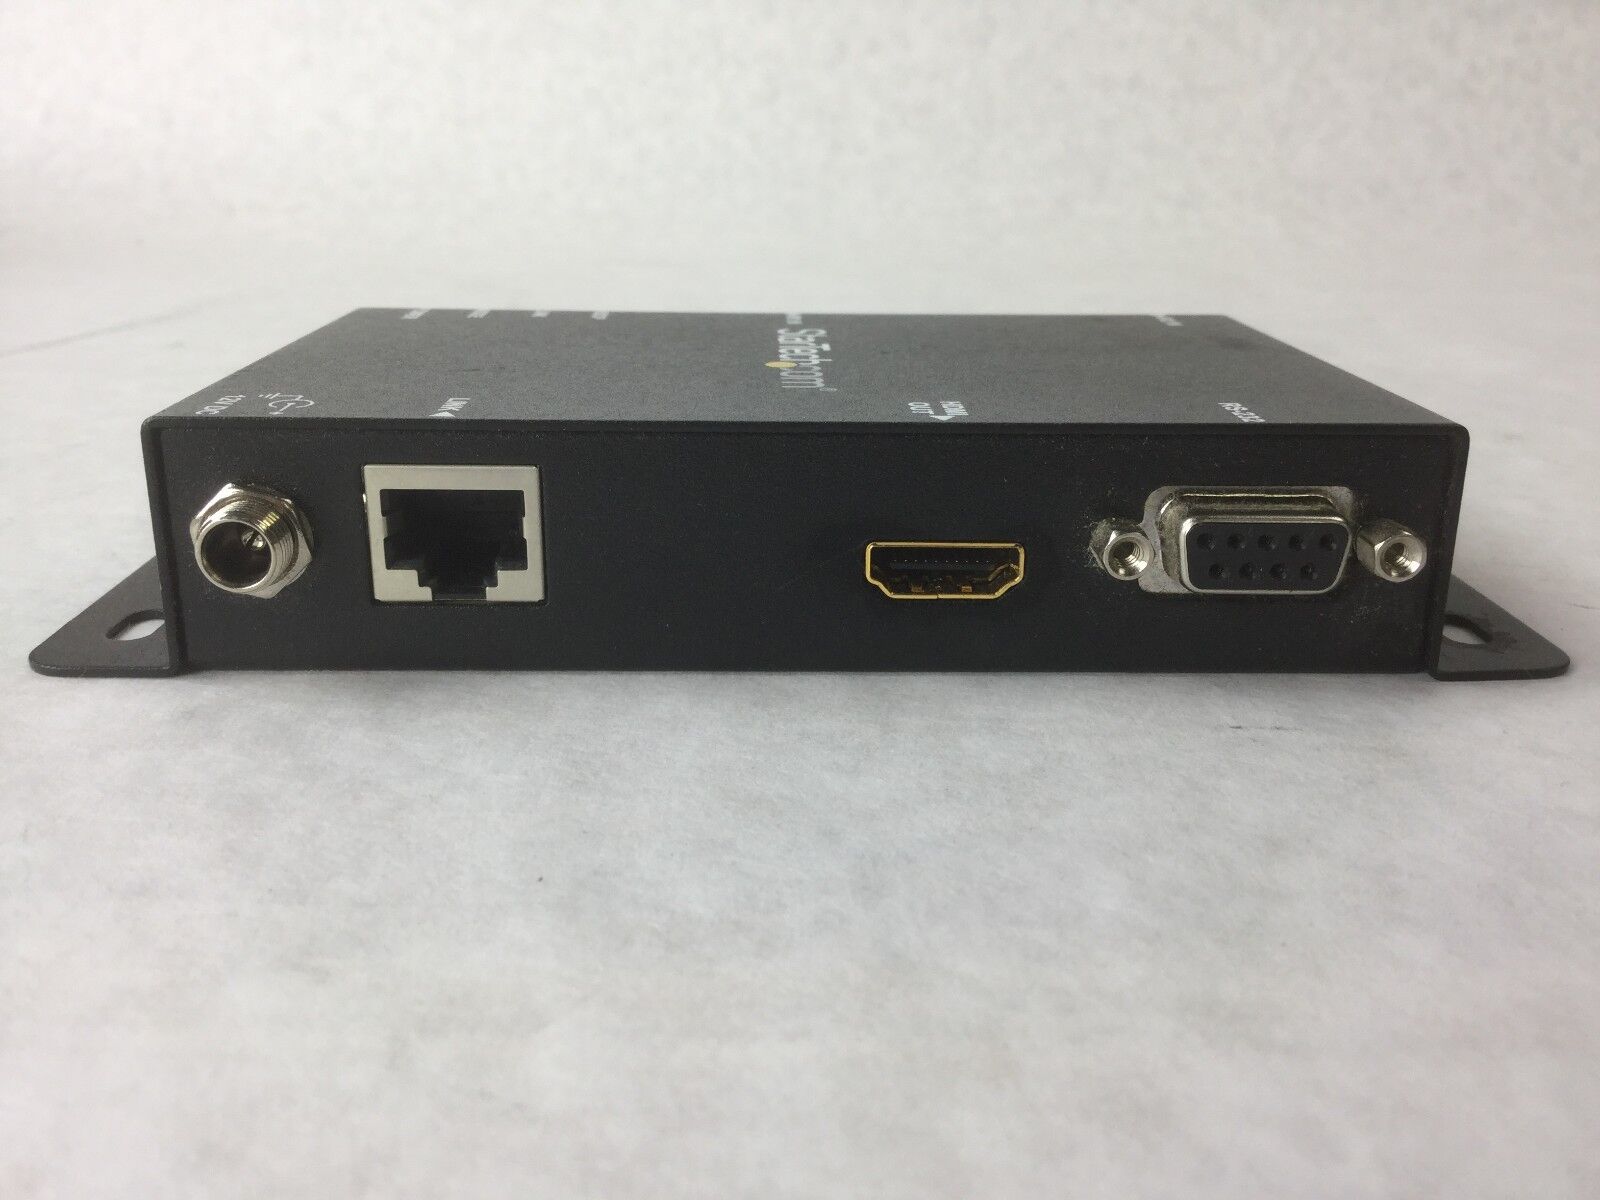 StarTech ST121UTPHD2 HDMI over Cat5 Video Extender w/ RS232 and IR Control